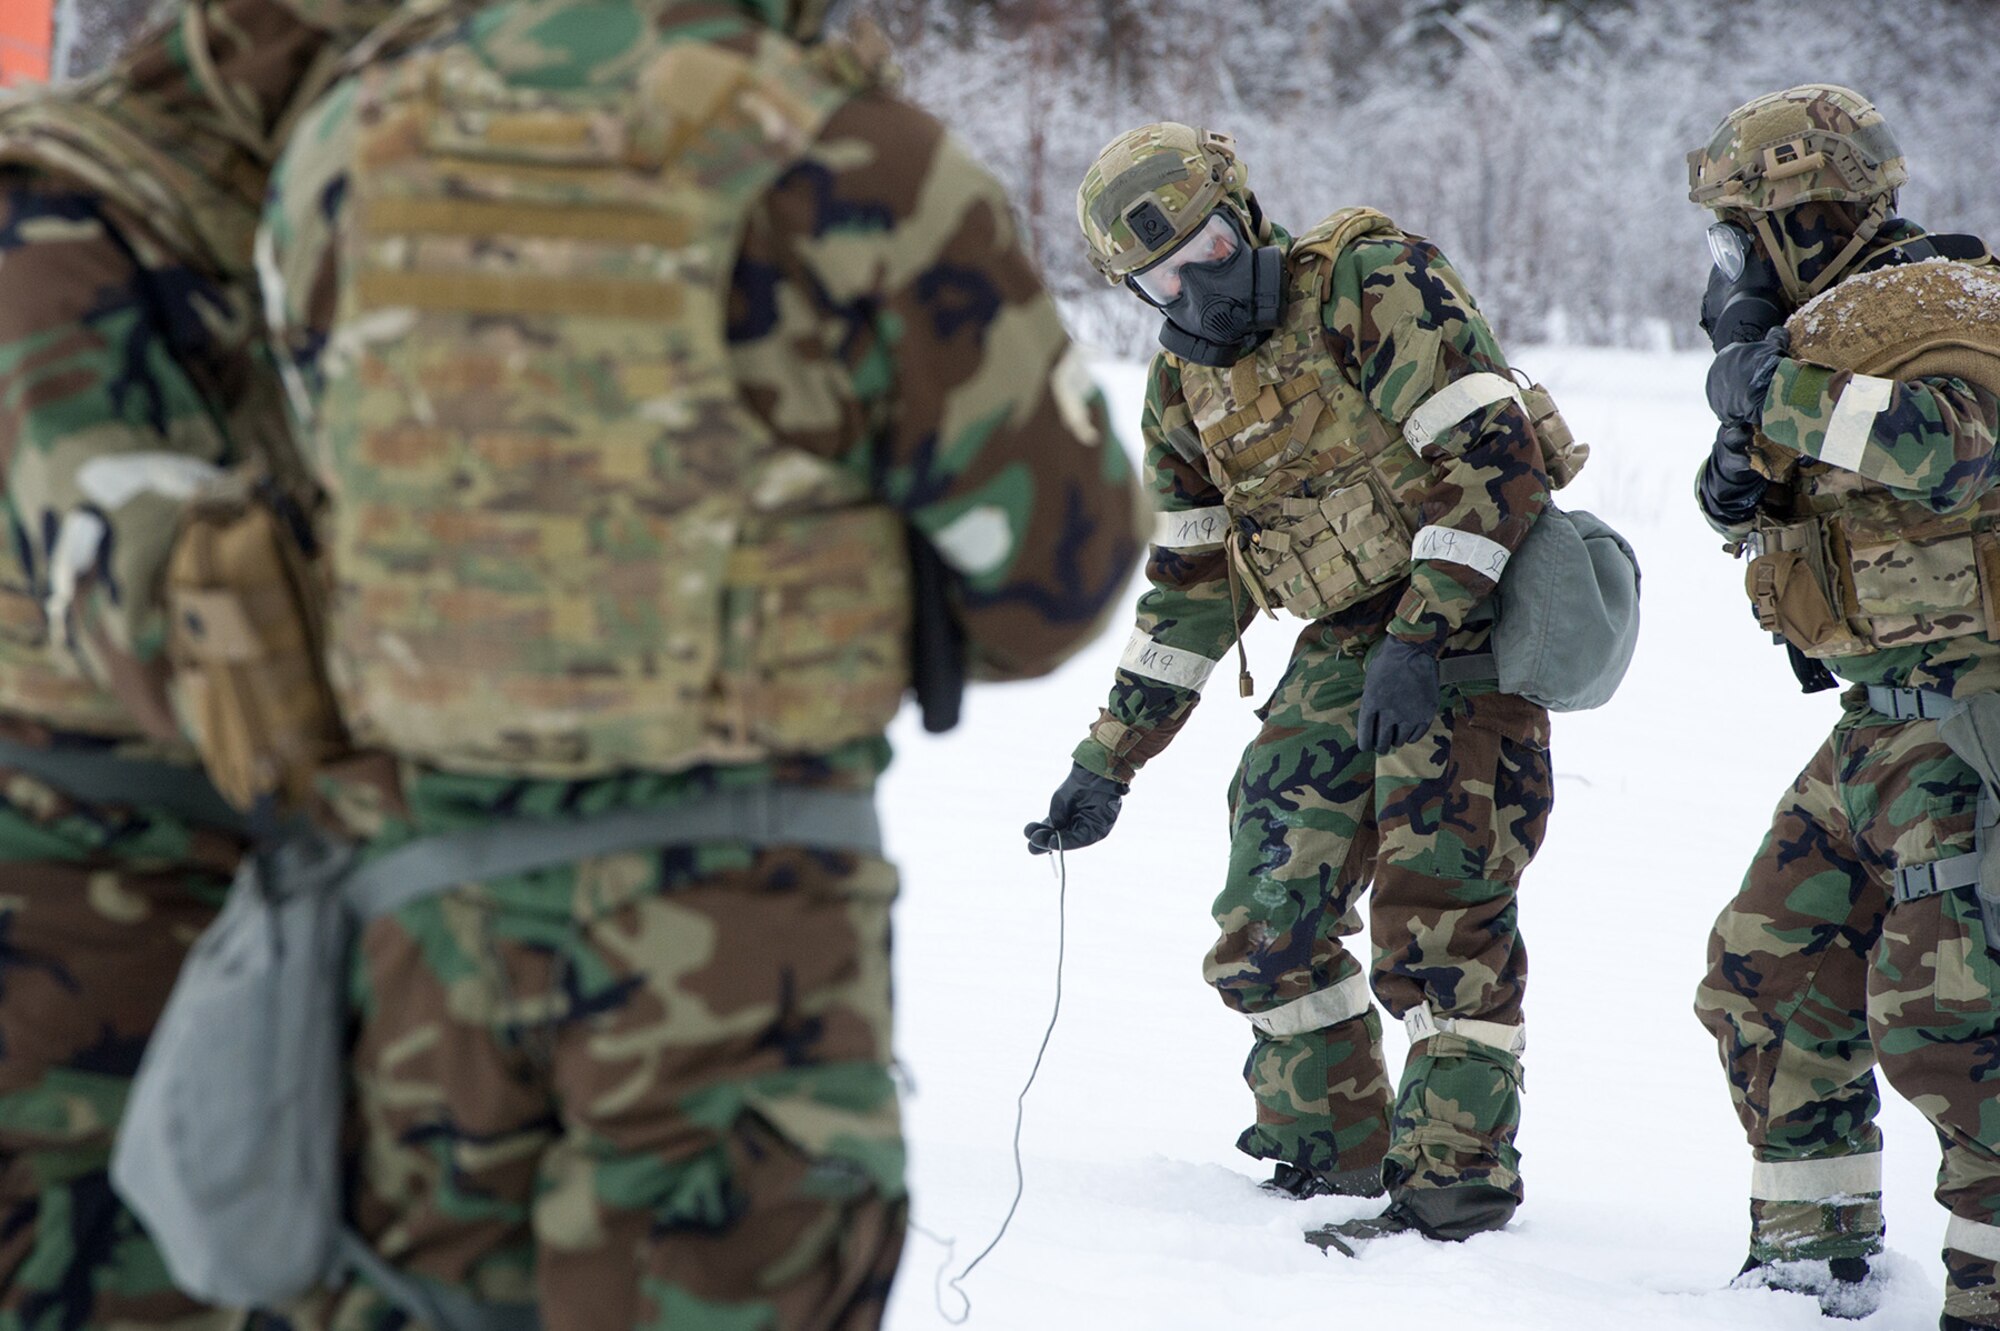 An Airman assigned to the 673d Civil Engineer Squadron, Explosives Ordinance Disposal Flight, prepares a blasting cap for a live-fire demolitions exercise in Mission Oriented Protective Posture 4 on Joint Base Elmendorf-Richardson, Alaska, Feb.14, 2018.  The Airmen were conducting EOD training in a simulated chemical weapons contaminated environment.